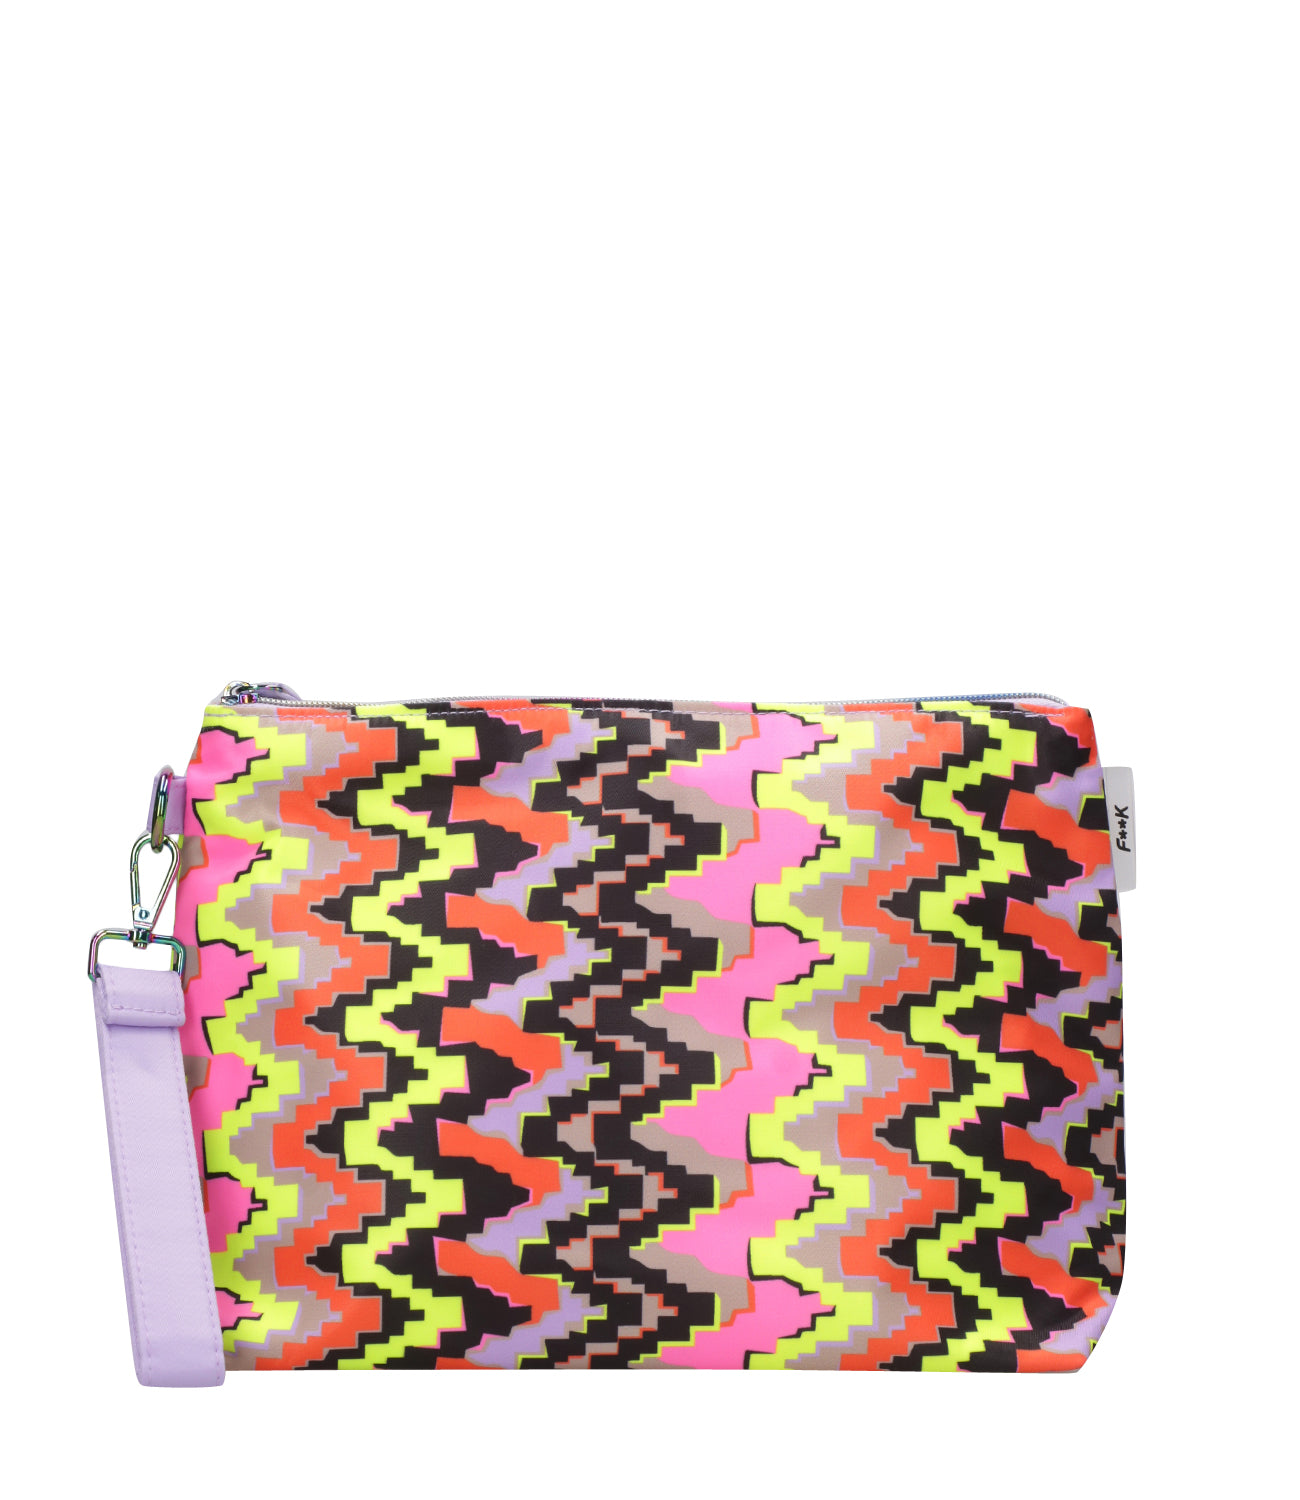 F**K Project | Reversible Multicolor and Lilac Beachbag Clutch Bag